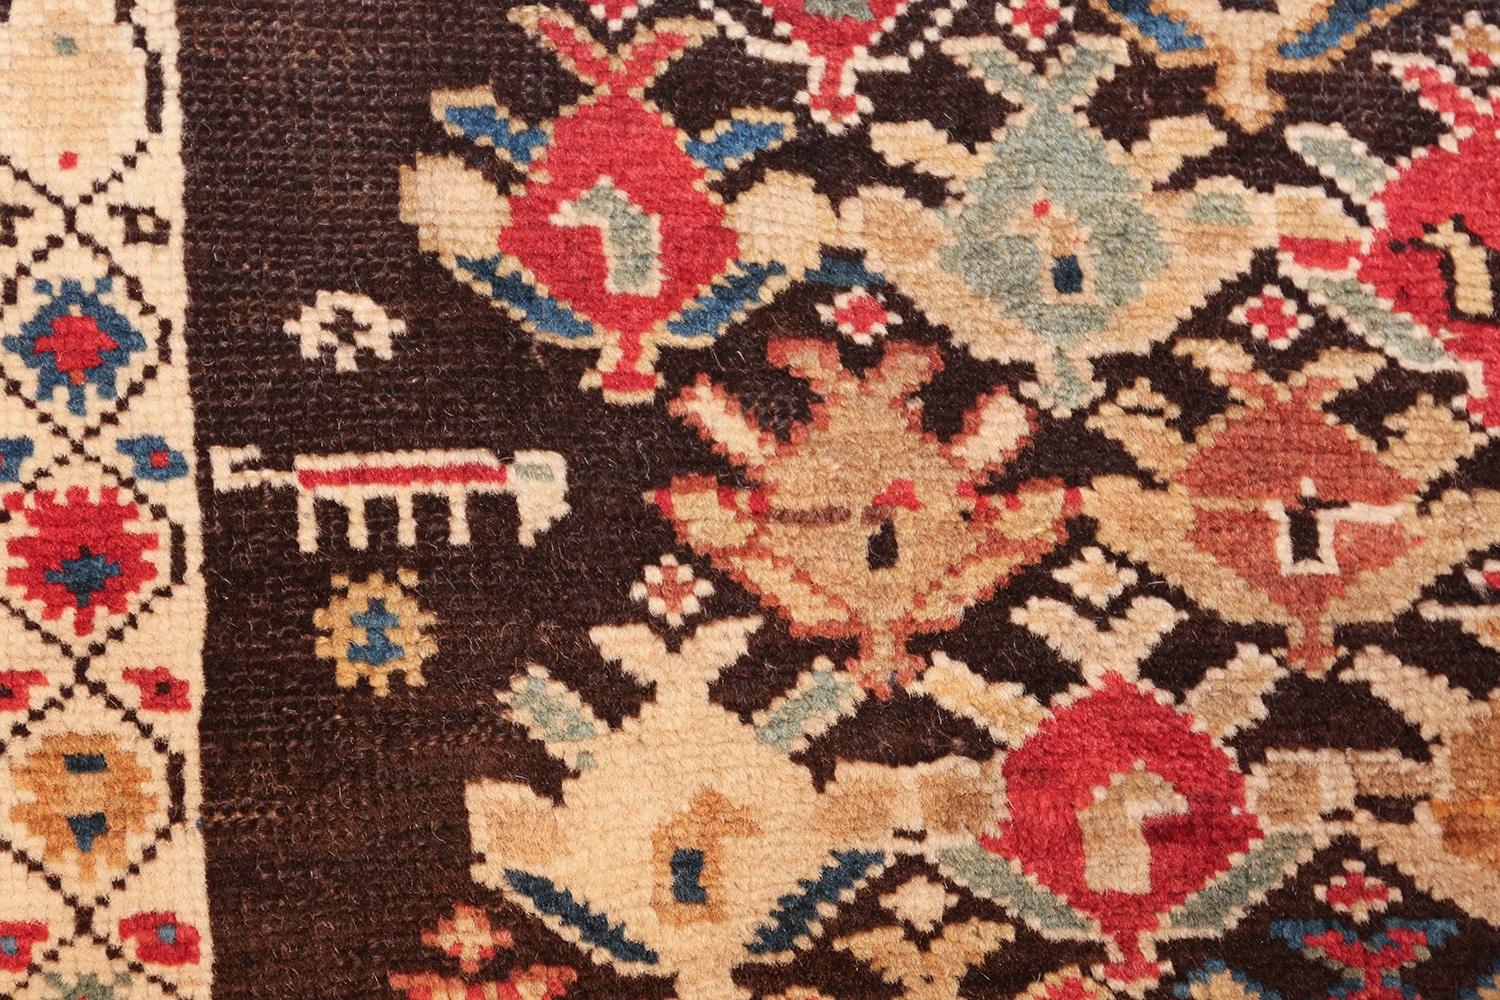 Beautiful and fascinating chocolate brown background antique tribal Caucasian Kuba rug, country of origin / Rug type: Caucasian rug, date circa 1900. Size: 4 ft x 10 ft 2 in (1.22 m x 3.1 m). 

This magnificent and primitive tribal antique Caucasian